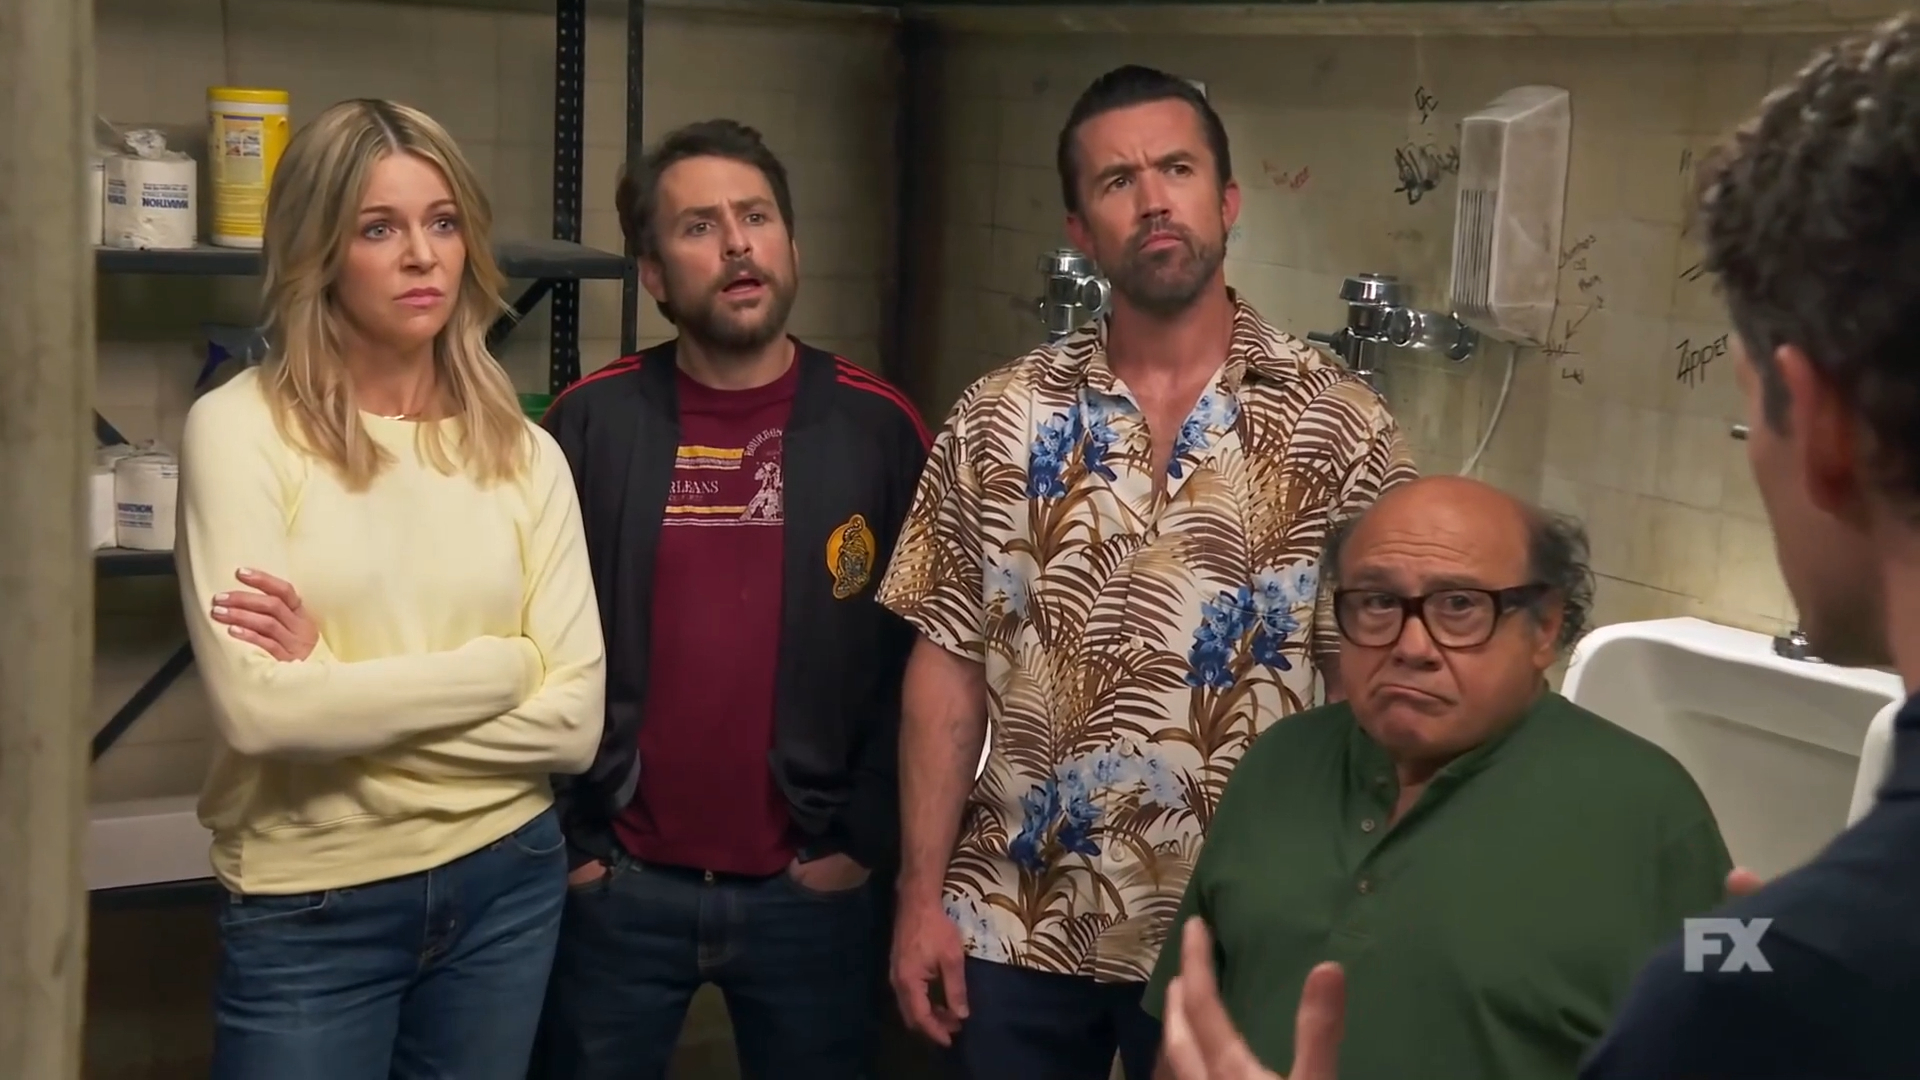 Four characters from &quot;It&#x27;s Always Sunny in Philadelphia&quot; look surprised in a bar setting